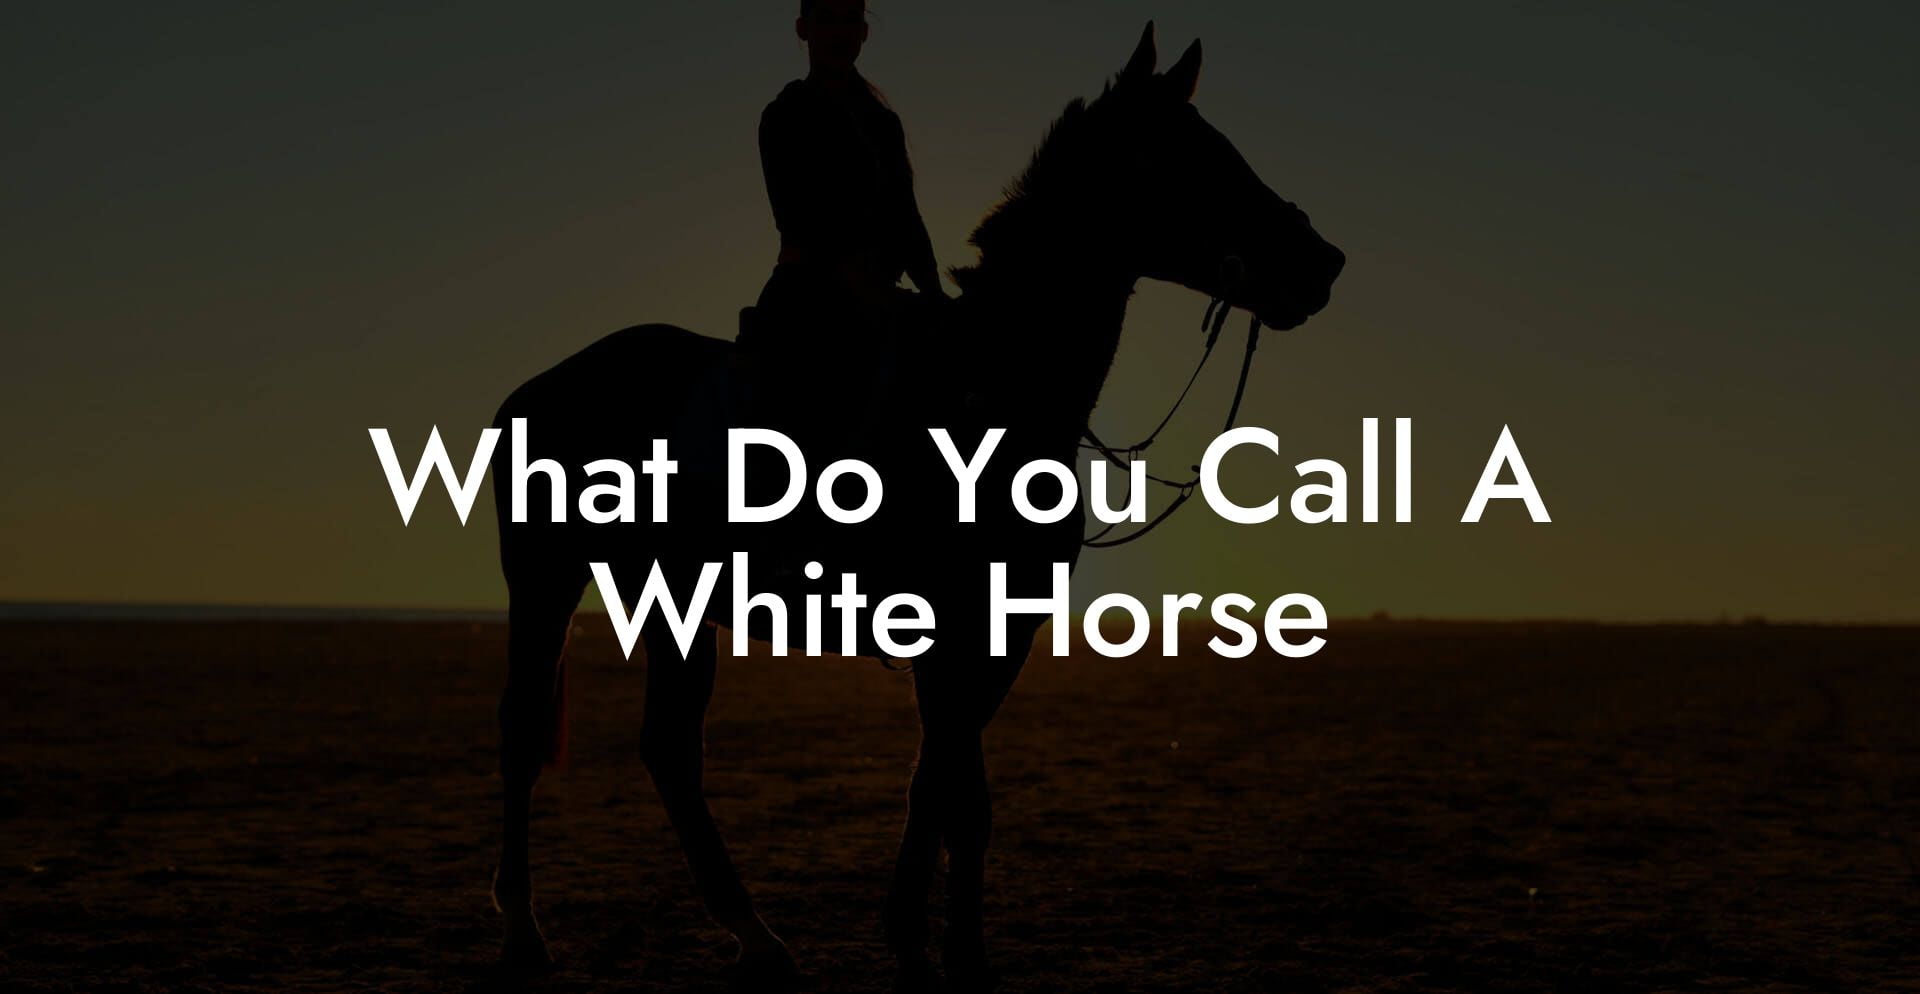 What Do You Call A White Horse